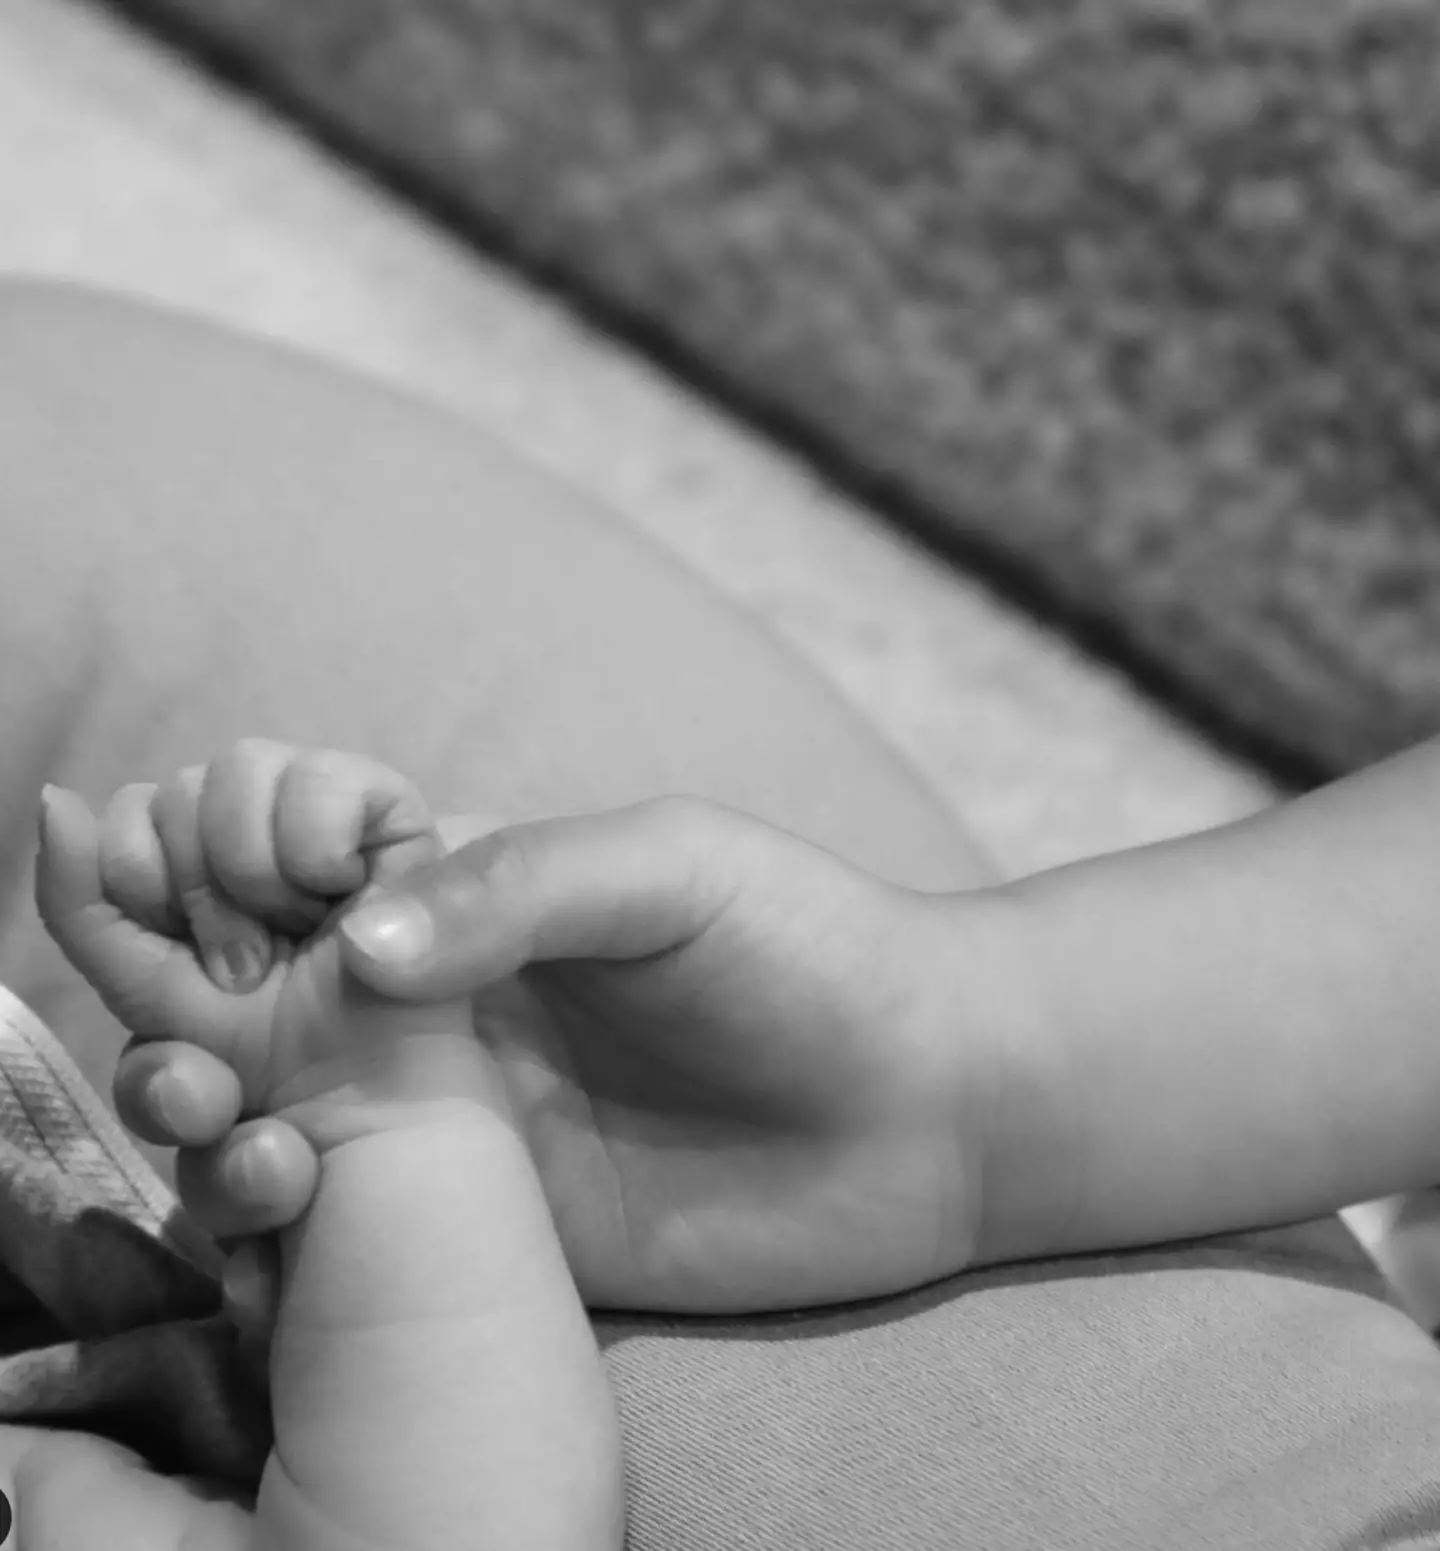 Kylie posted a photo of her baby's hand to announce the exciting news. (